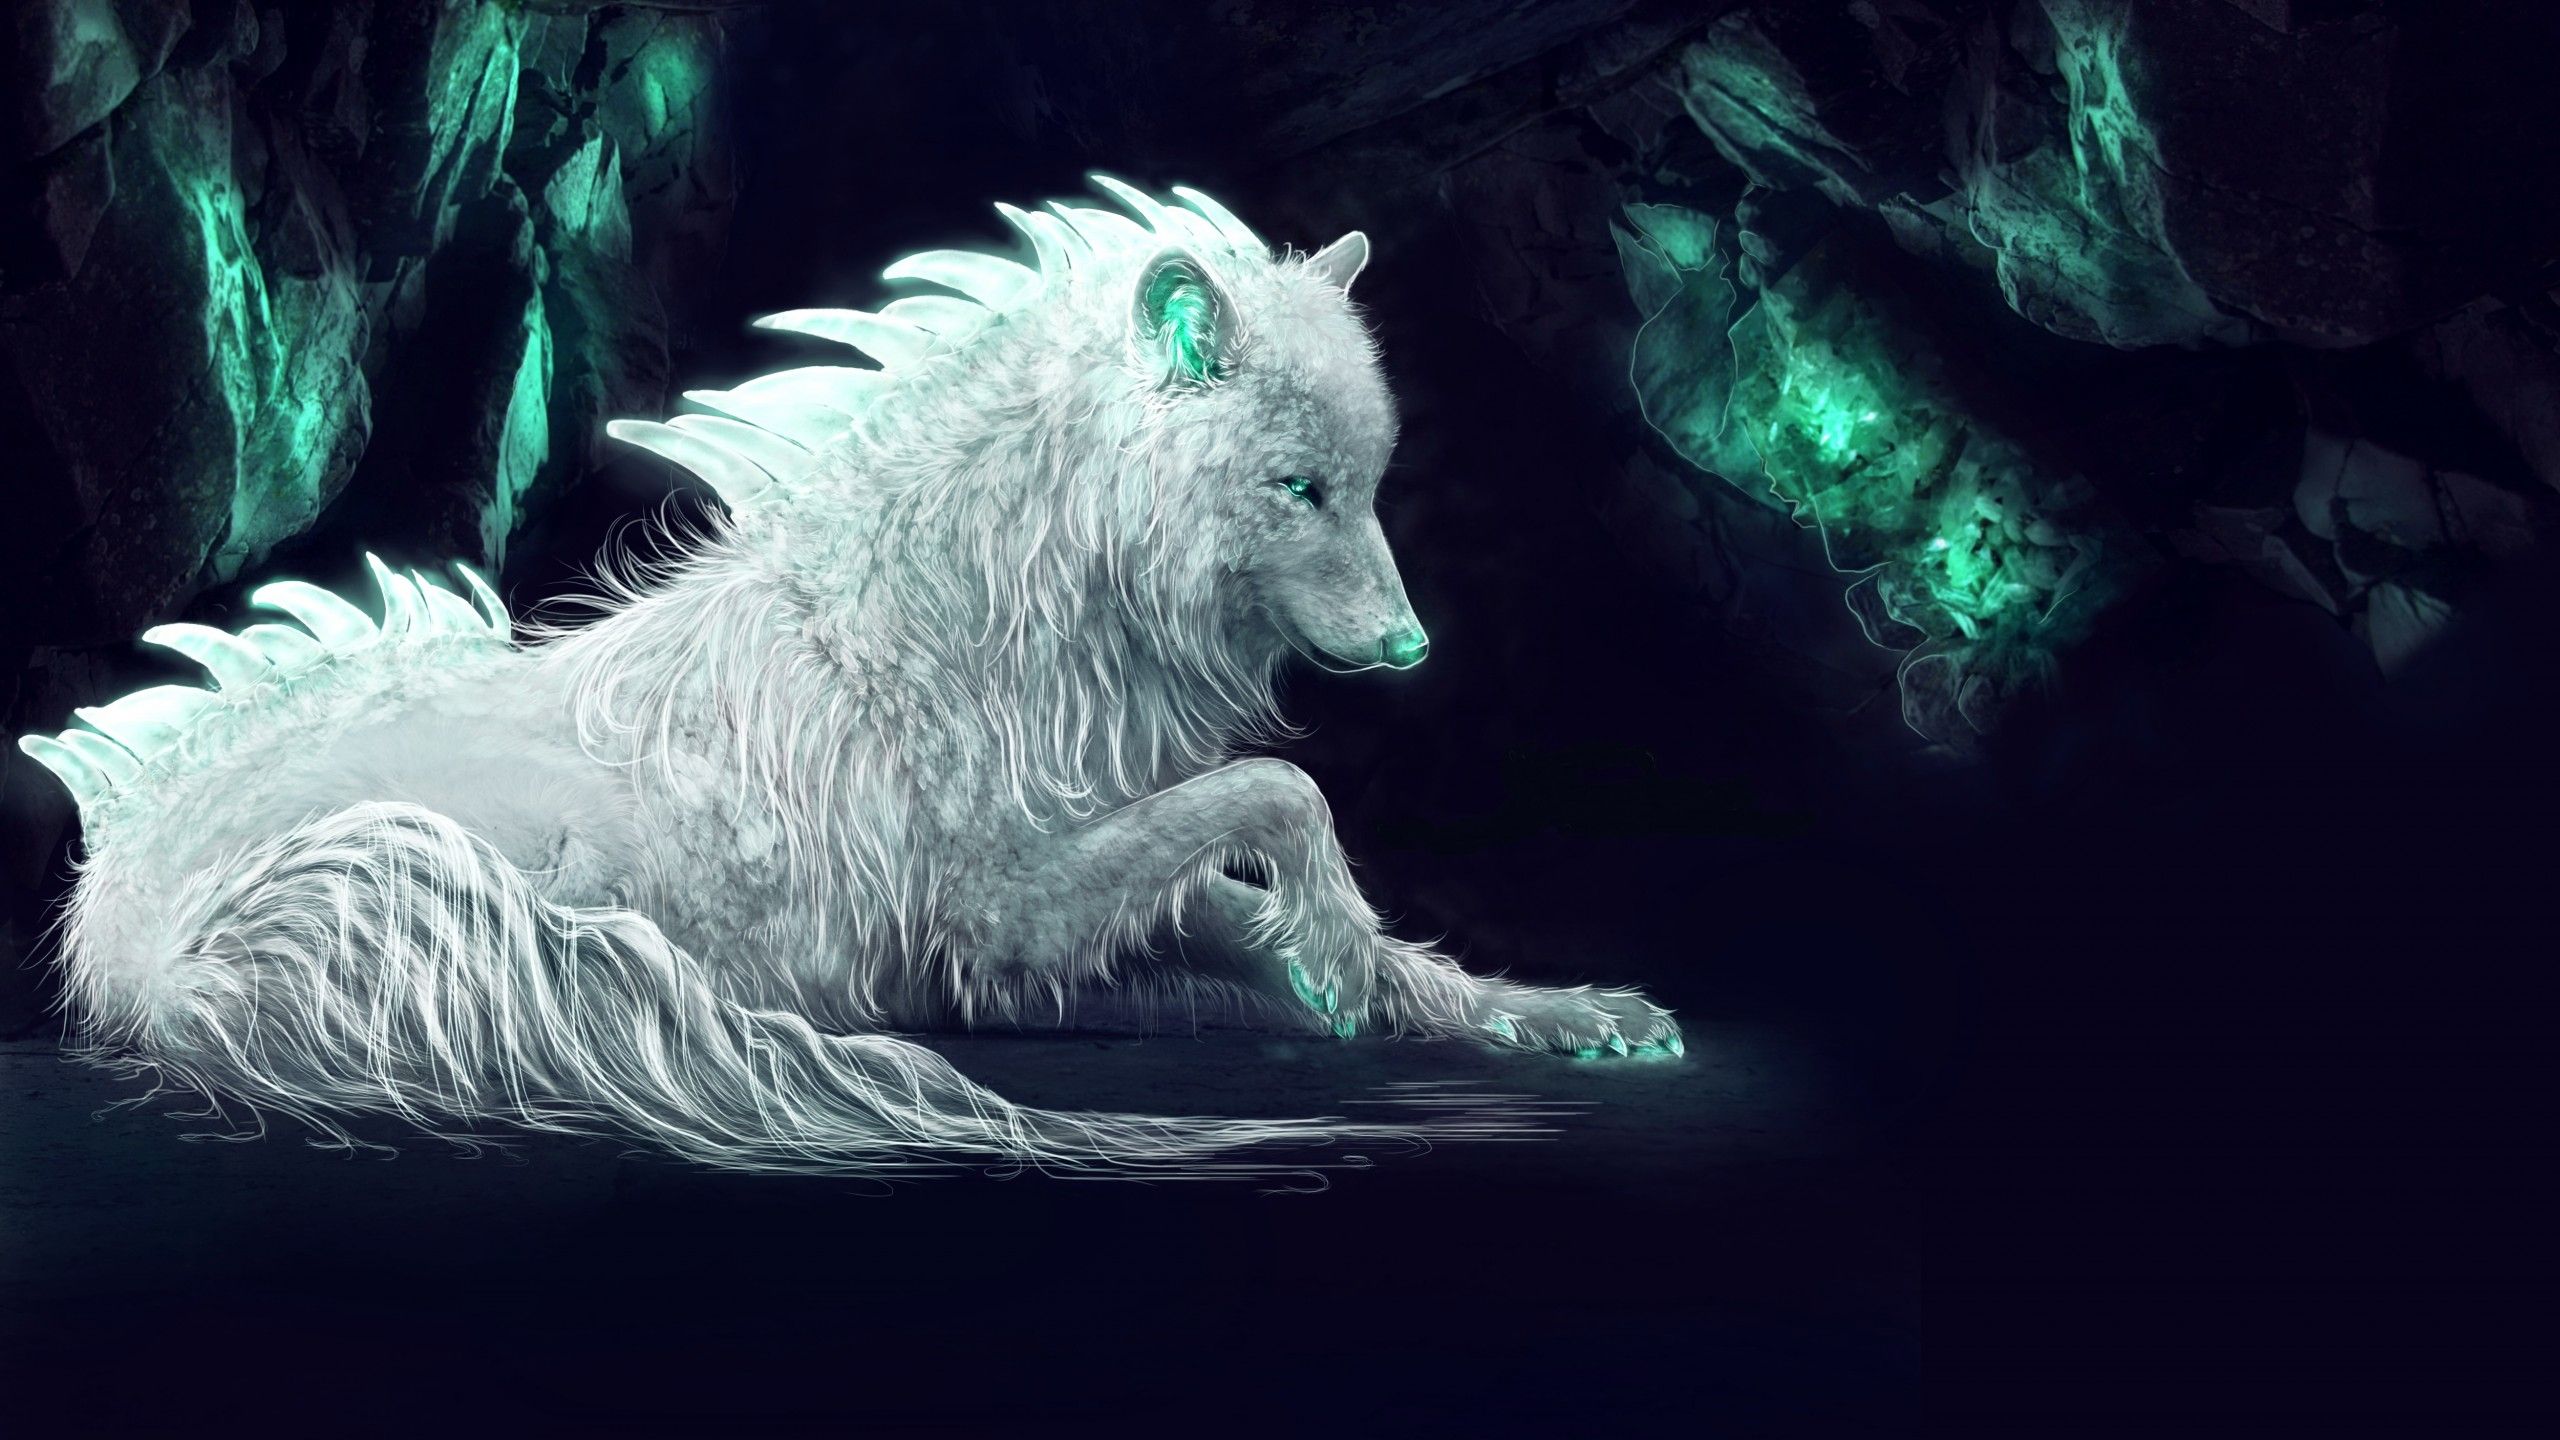 Wallpaper White wolf, Arctic wolf, Fantasy, Digital art, 4K, Creative Graphics / Editor's Picks,. Wallpaper for iPhone, Android, Mobile and Desktop